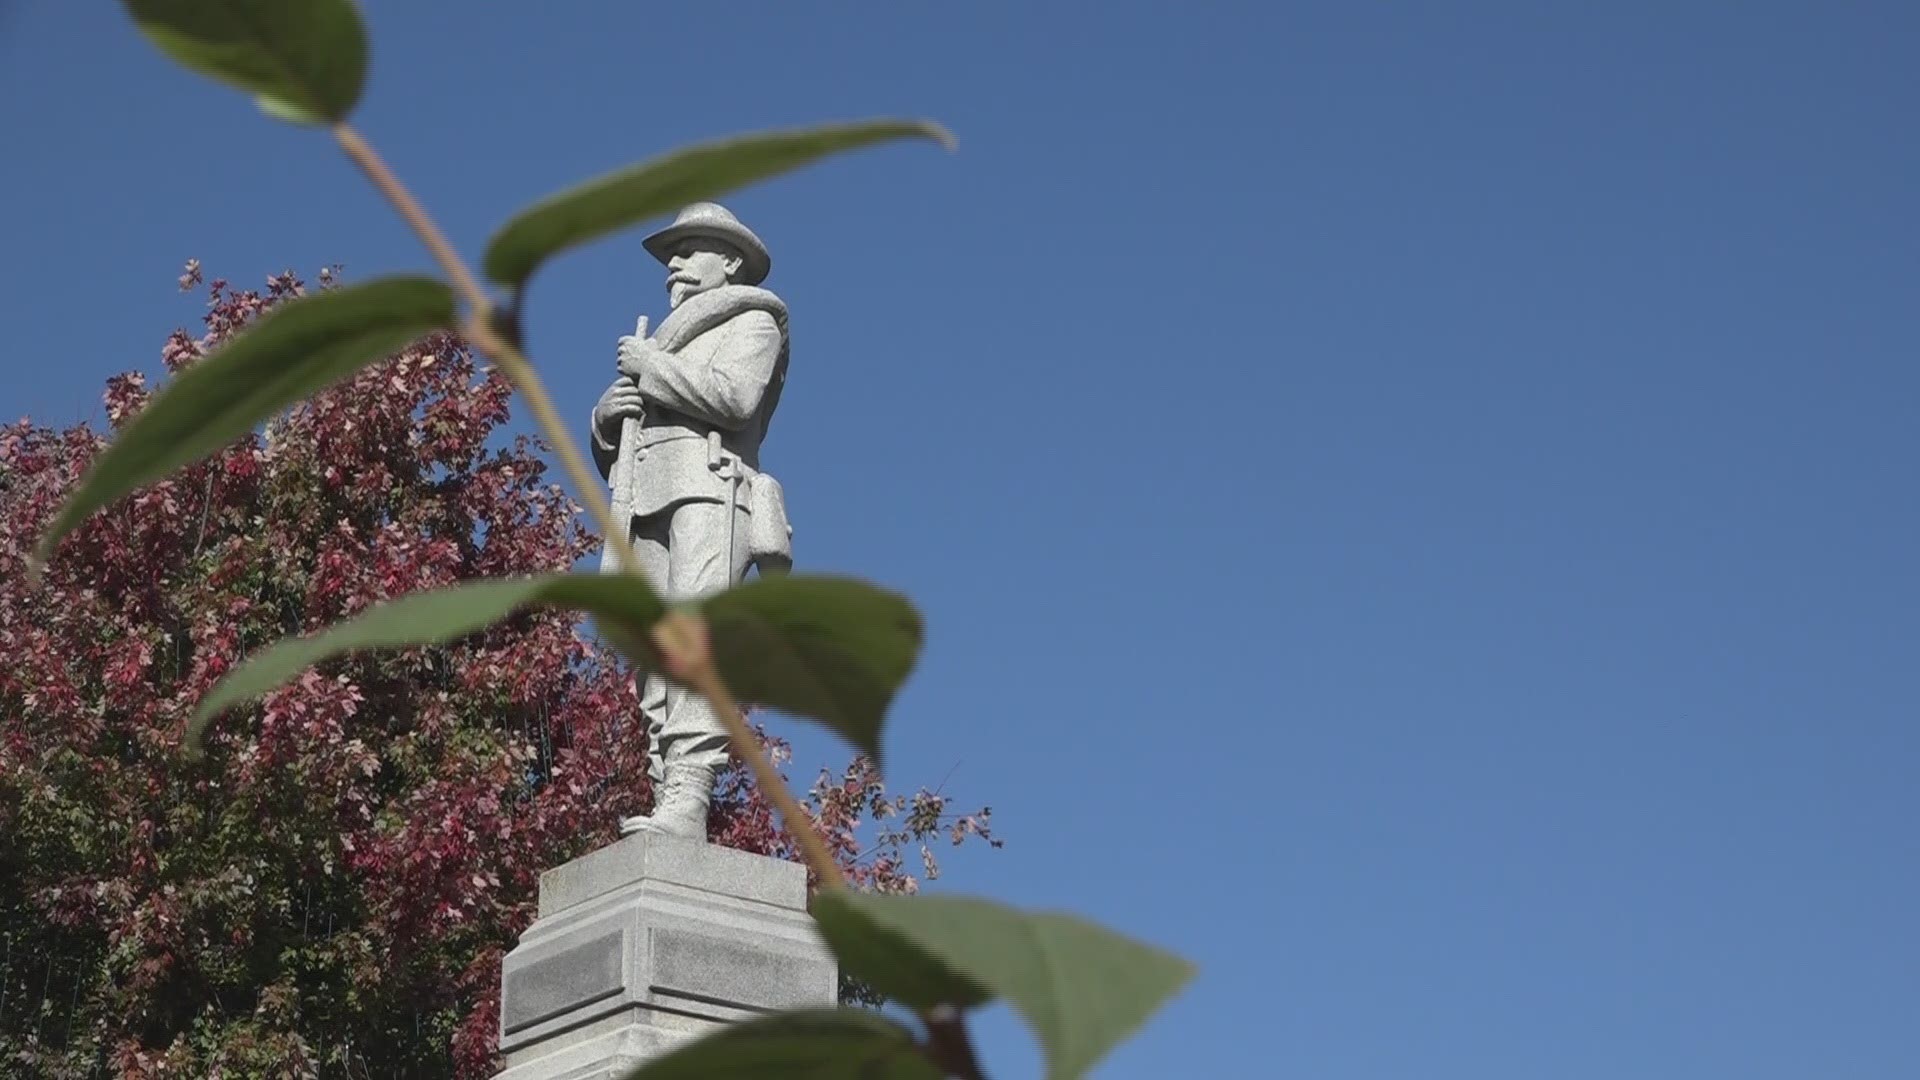 The monument is being restored and moved to an undisclosed location. Once restored, the monument will be placed in a new park near a Bentonville cemetery.